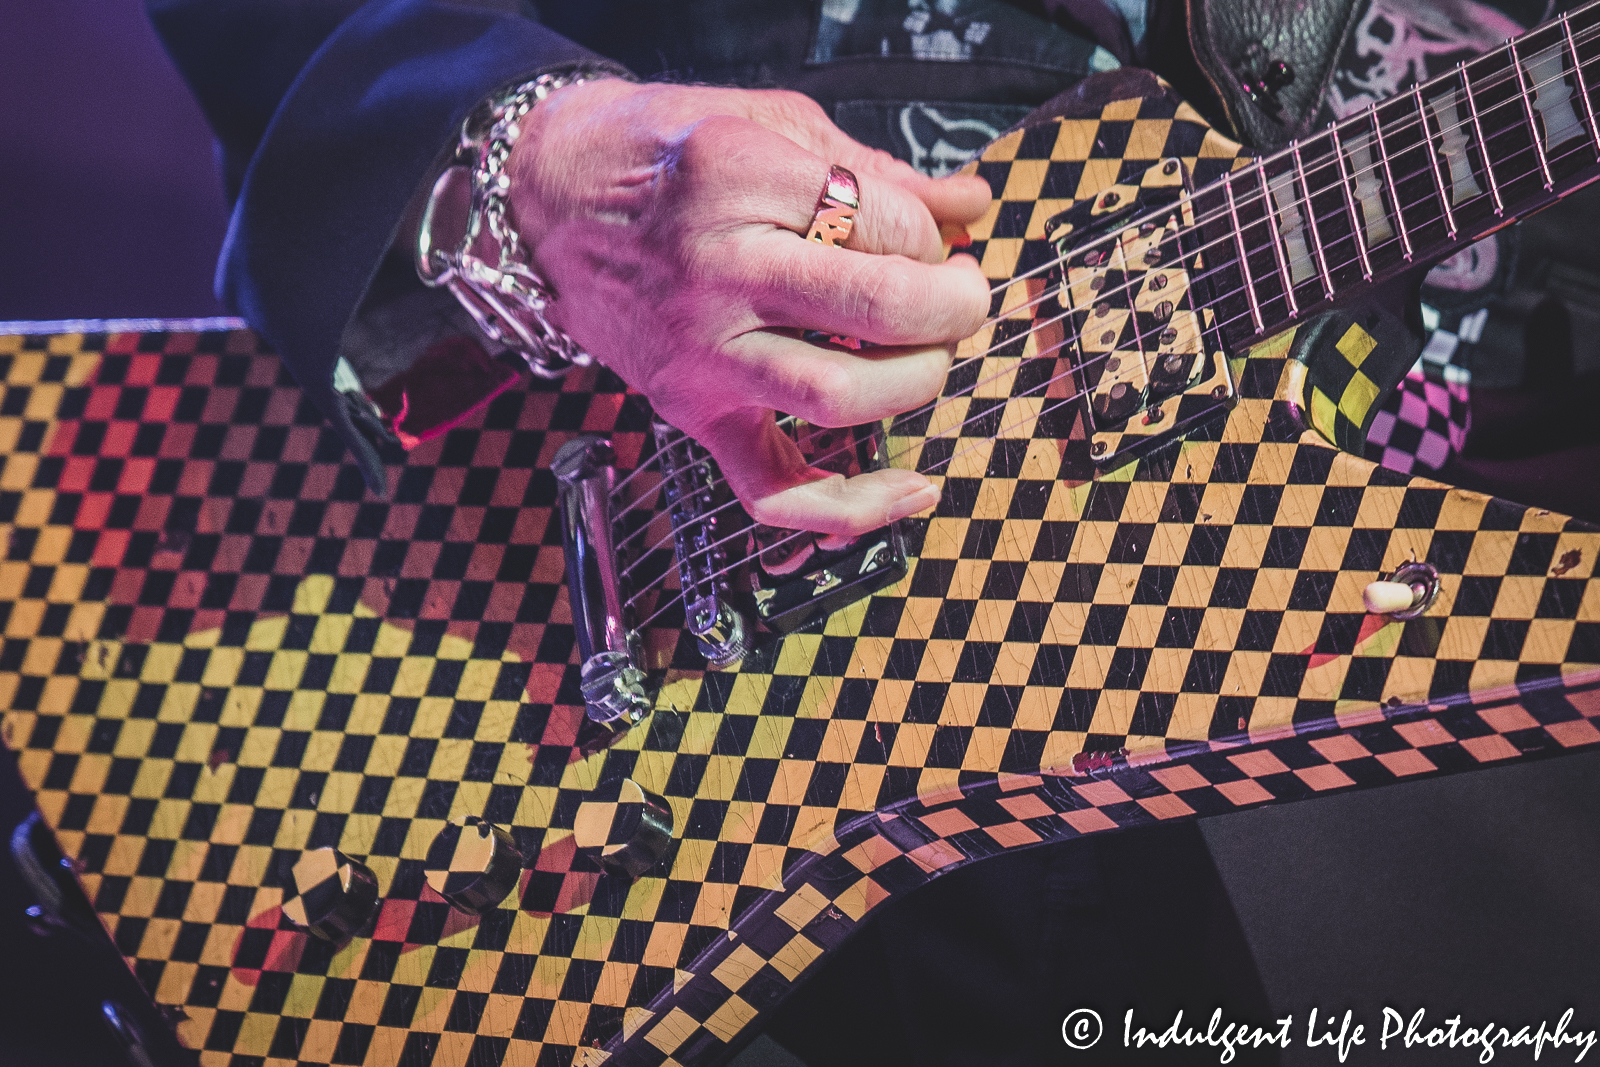 Guitar of Cheap Trick founding member Rick Nielsen as he performed live in concert at Uptown Theater in Kansas City, MO on September 13, 2022.